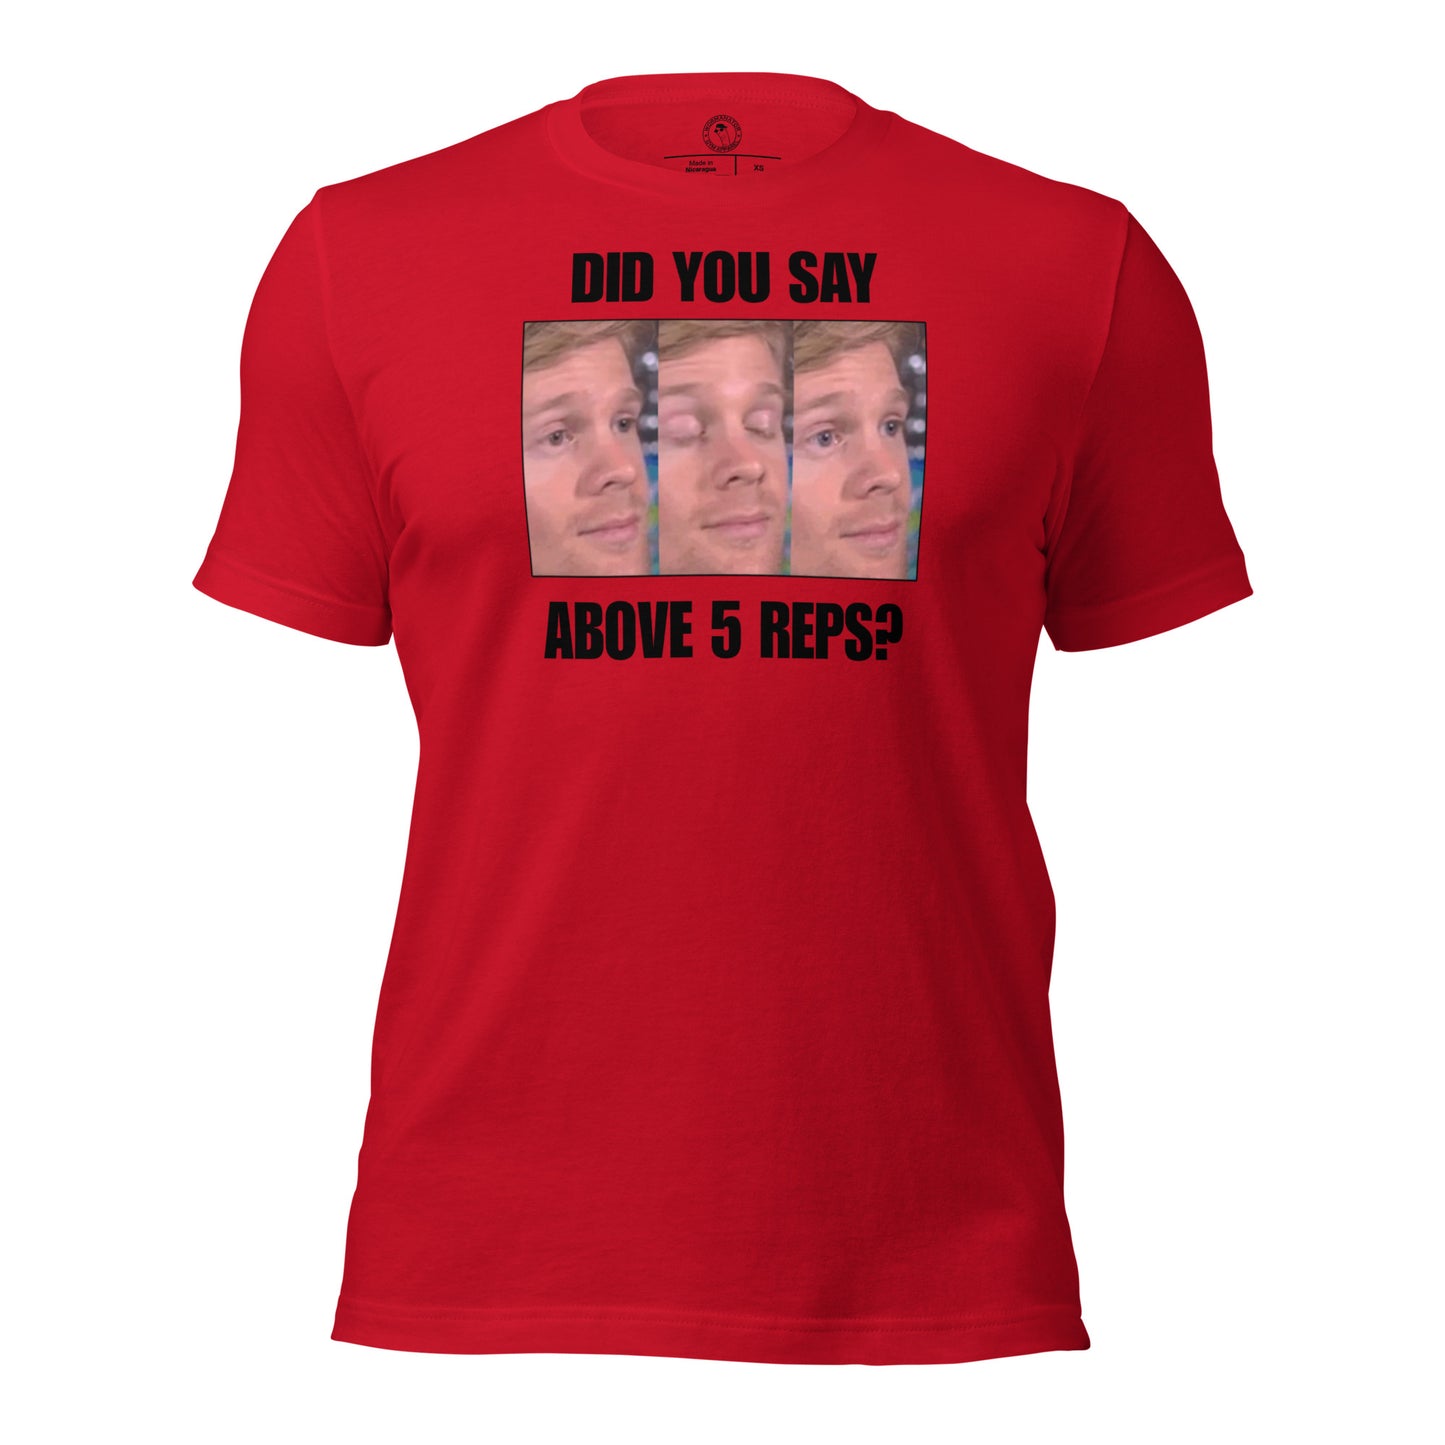 Above 5 Reps is Cardio Shirt in Red